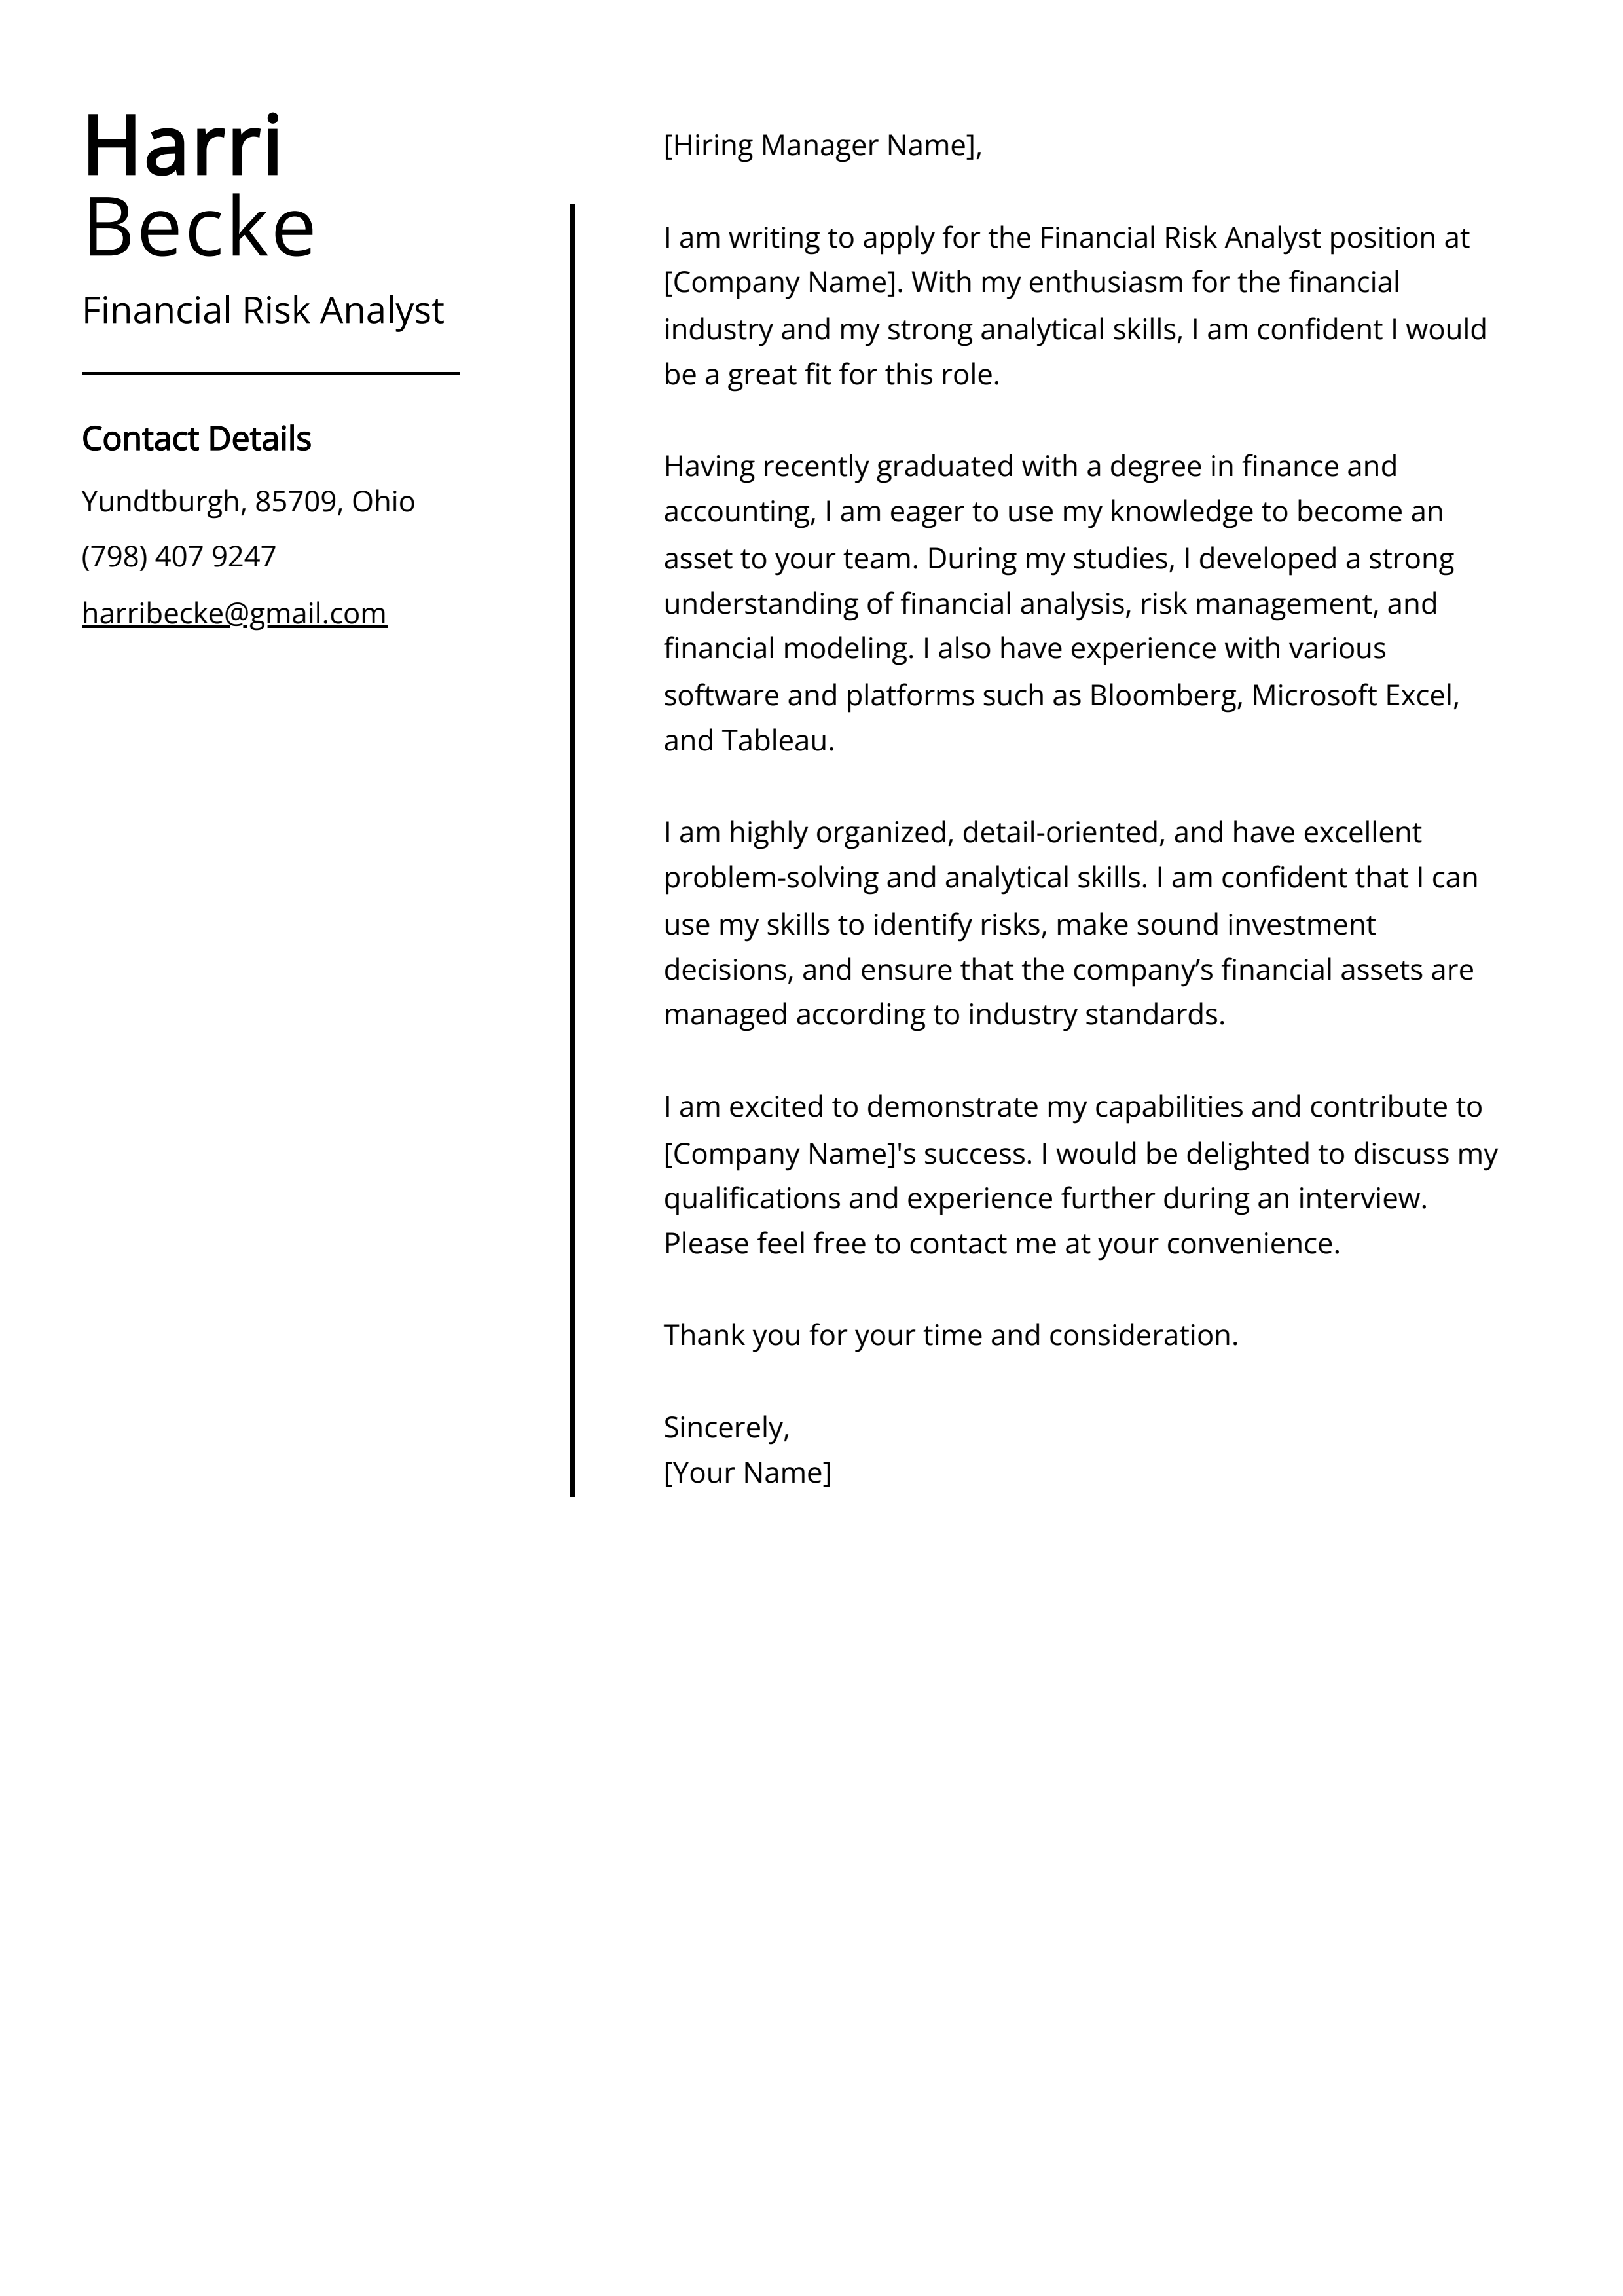 Financial Risk Analyst Cover Letter Example